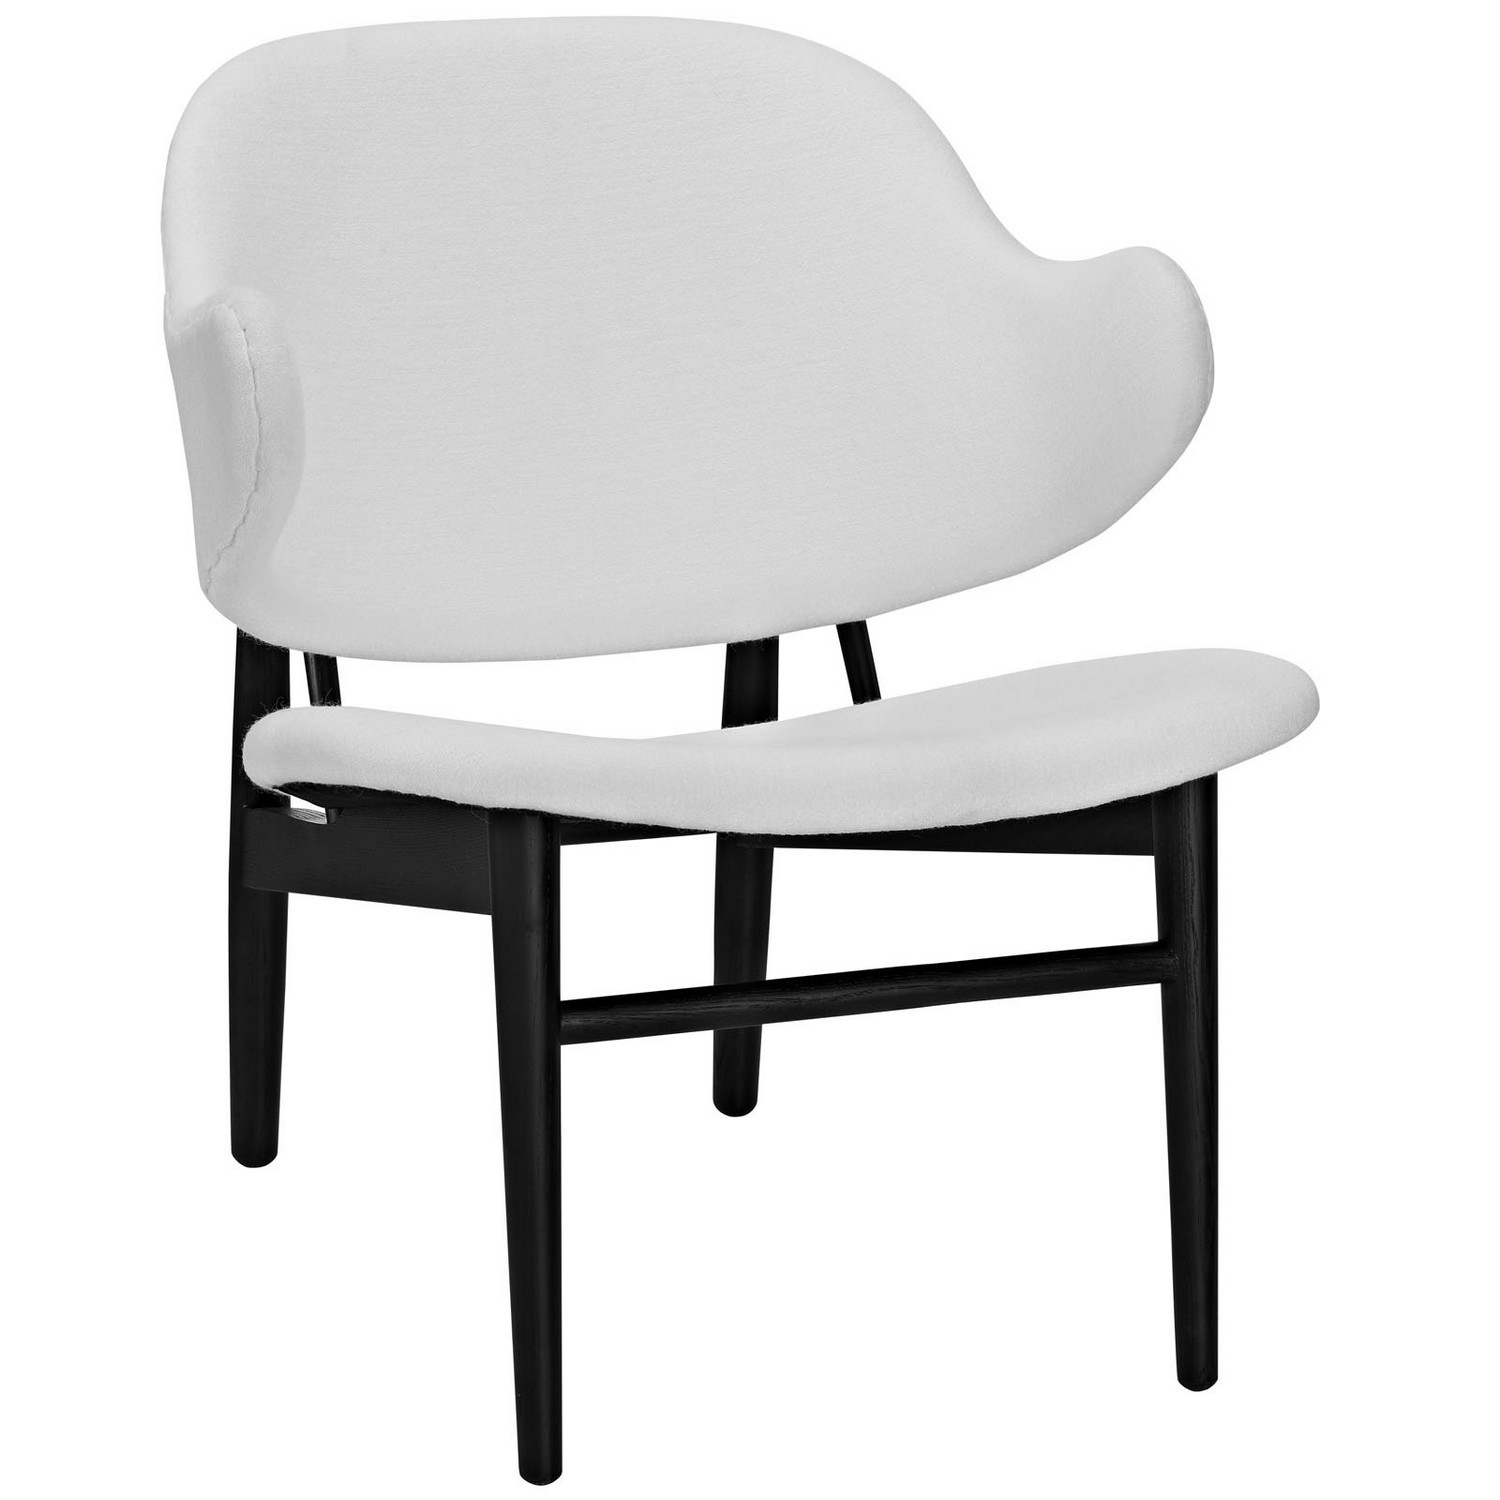 Modway Suffuse Lounge Chair - Black/White